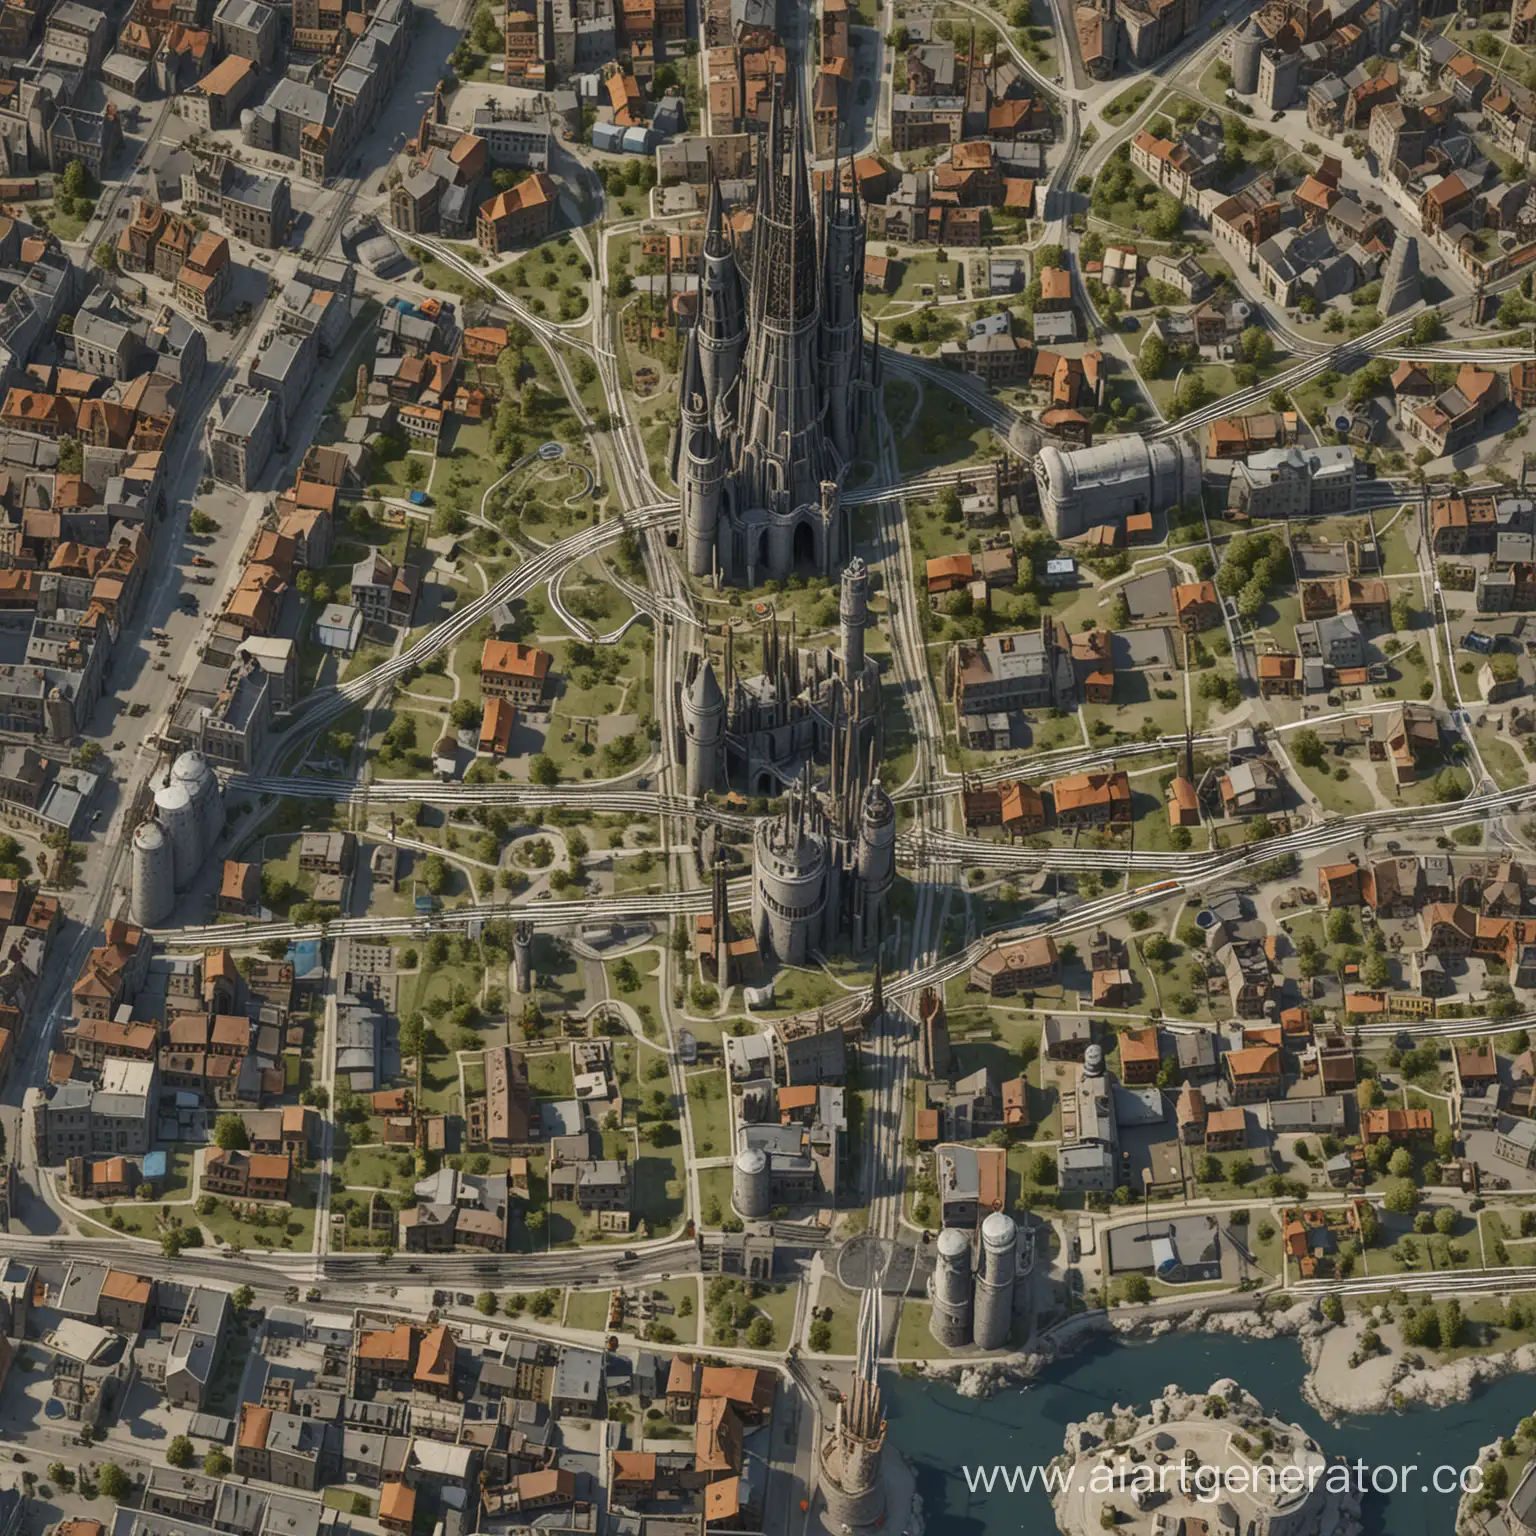 Industrialized-Medieval-City-with-Electrical-Networks-and-Wizard-Towers